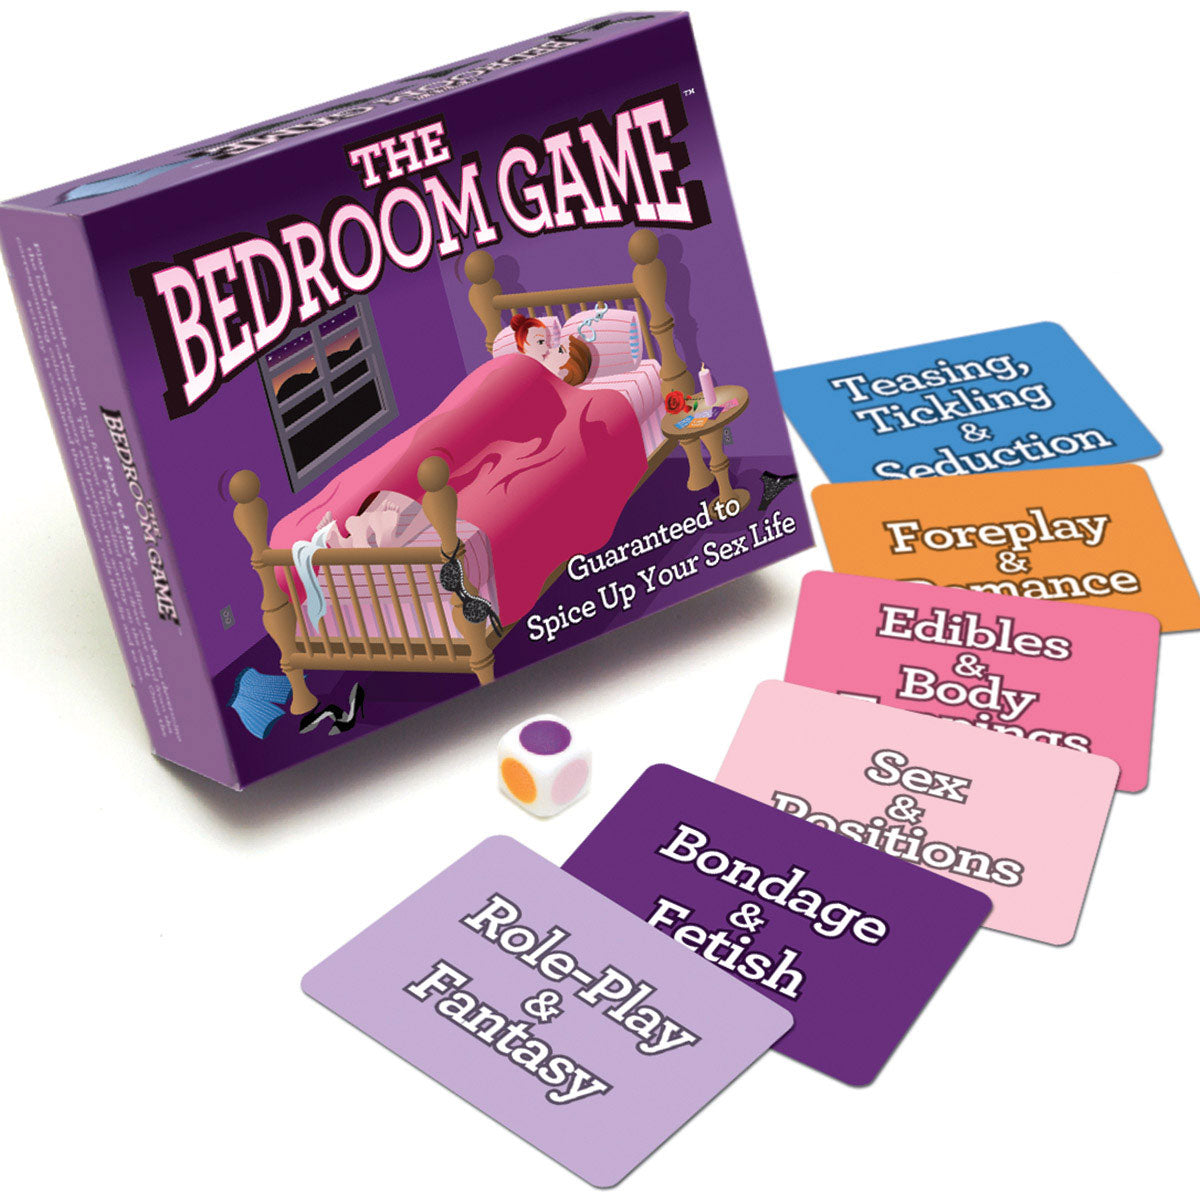 Ball & Chain Bedroom Game